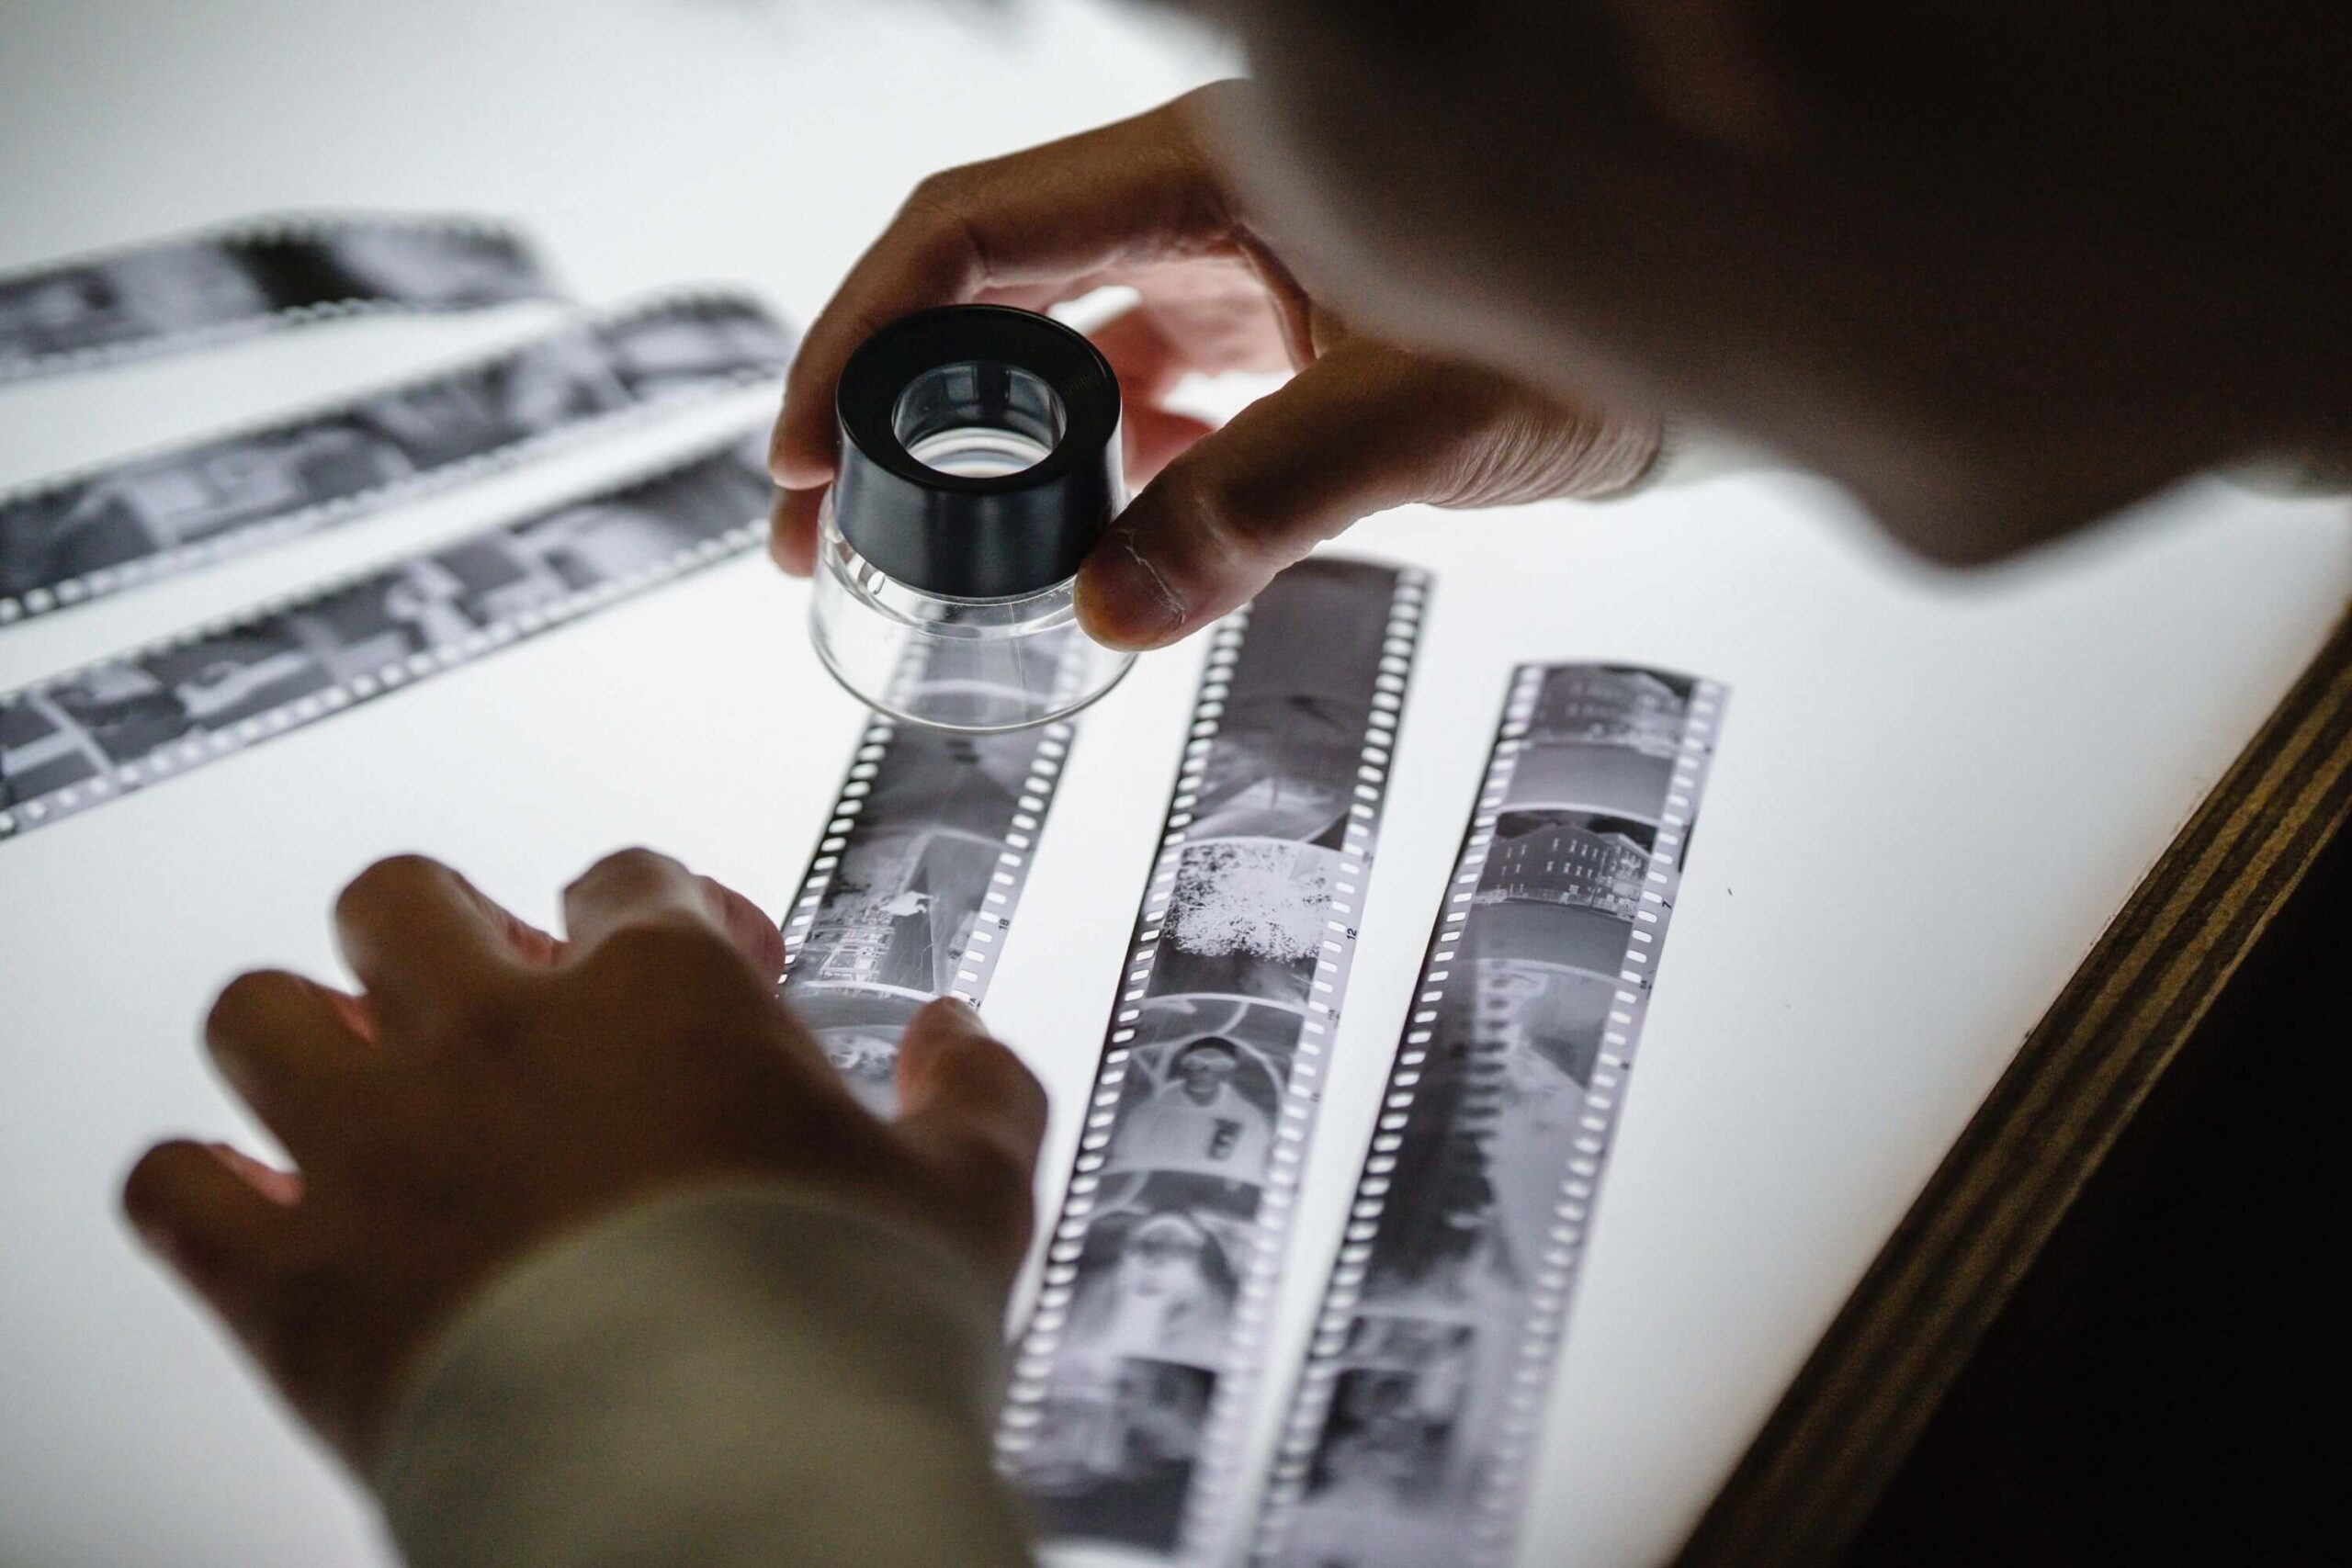 checking film negatives on a light tables